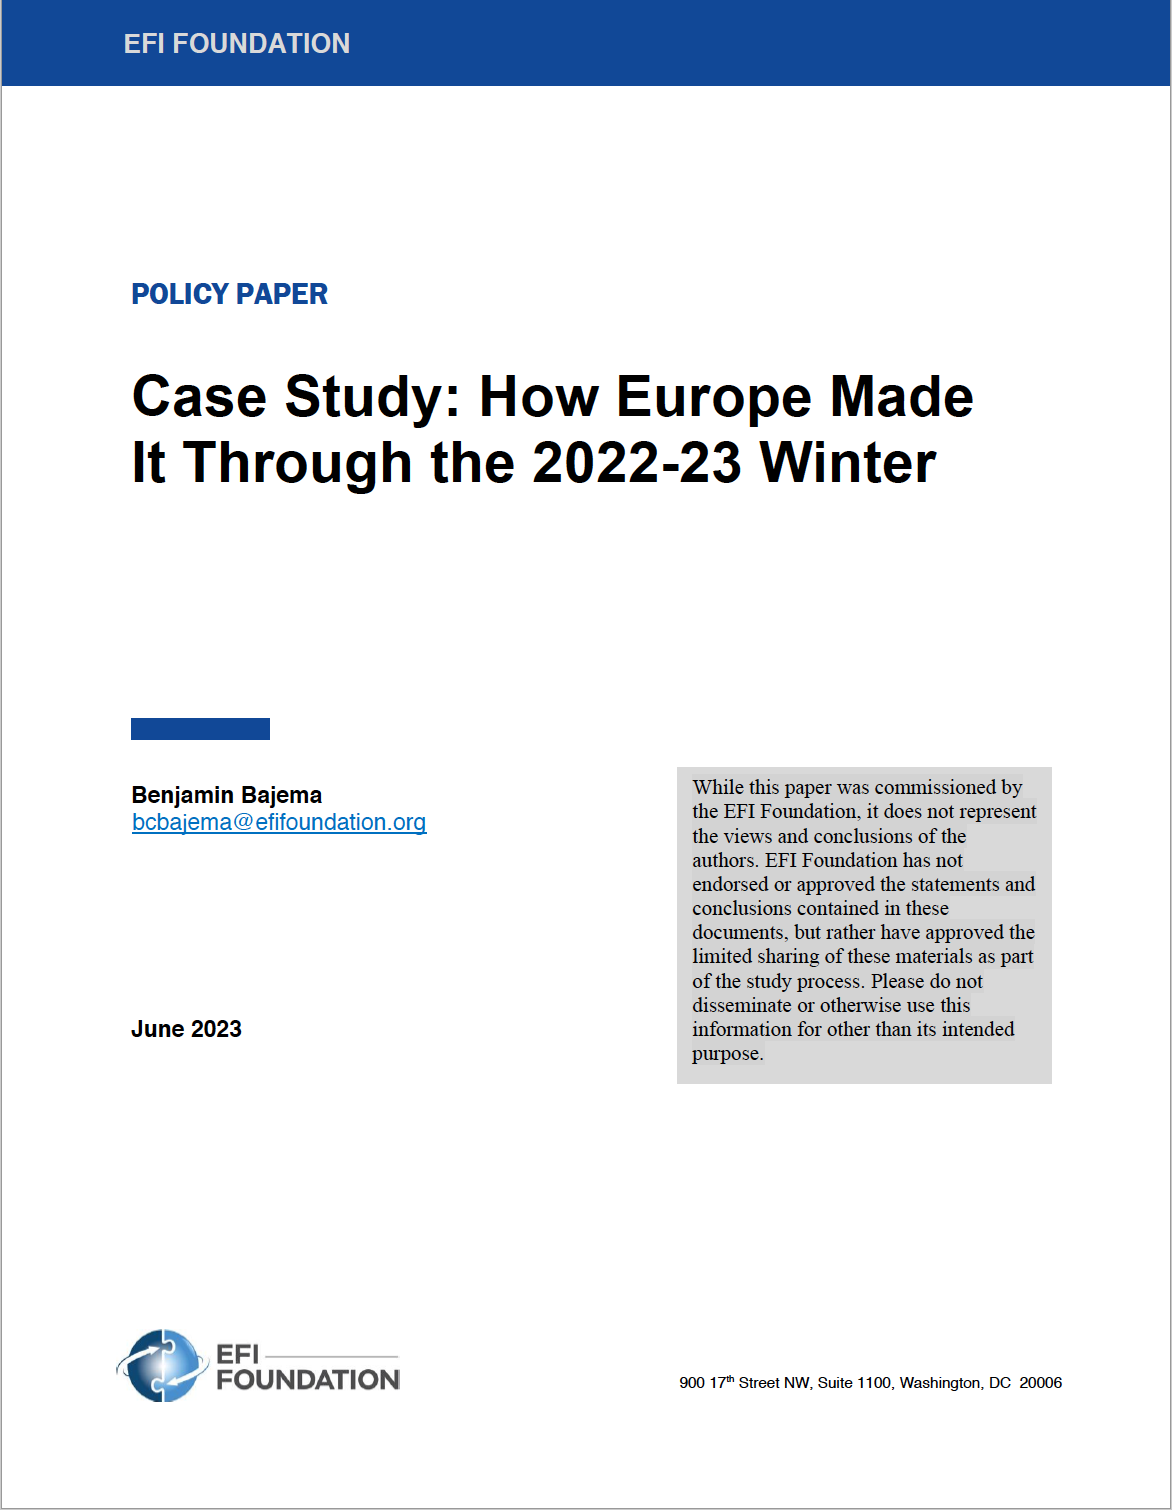 Case Study cover titled 